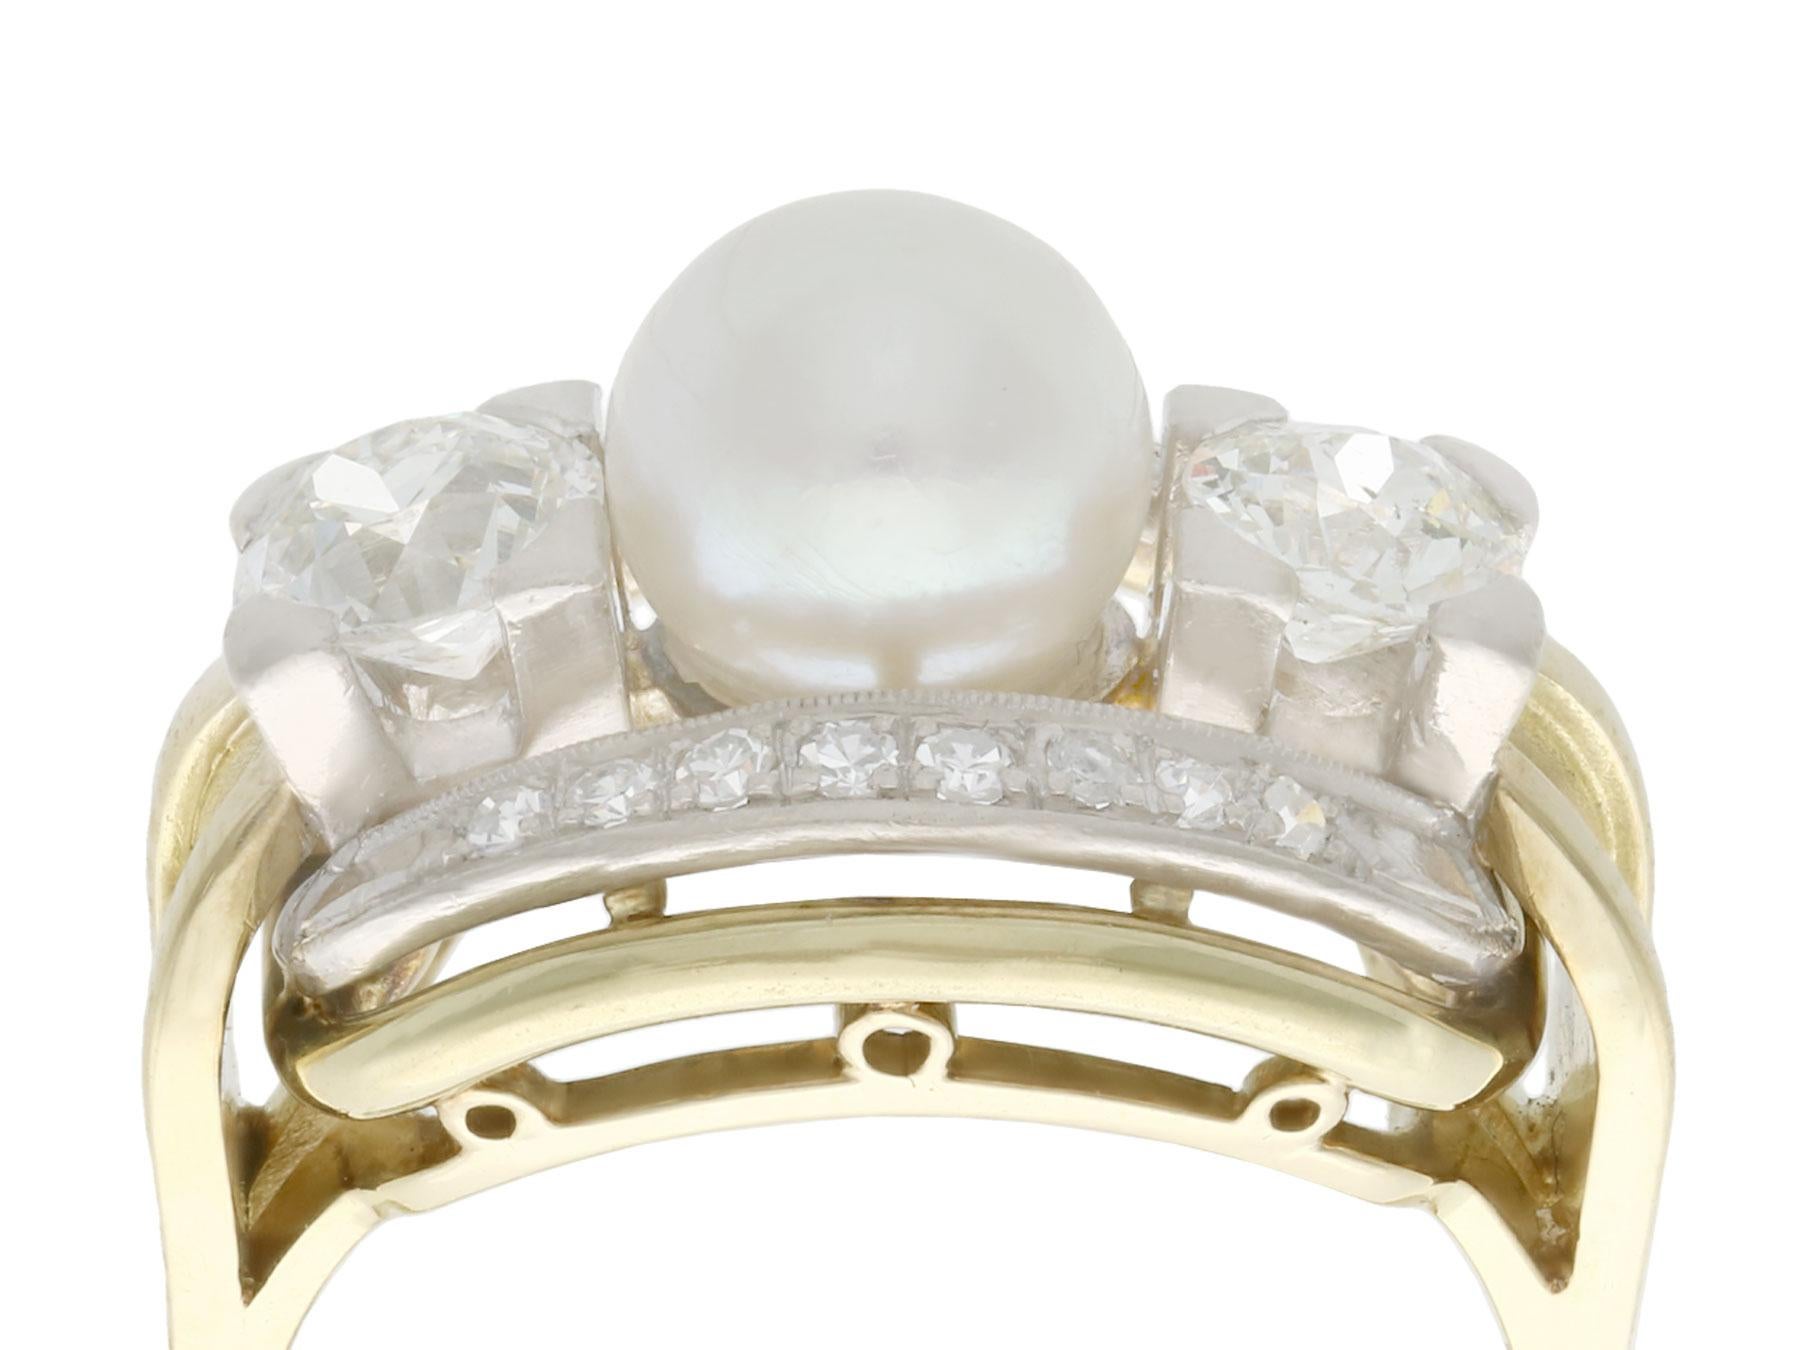 This stunning, fine and impressive pearl and diamond dress ring has been crafted in 14k yellow gold with a 14k white gold setting.

The oval shaped pierced decorated frame is ornamented with an impressive 7mm cultured pearl flanked on either side by